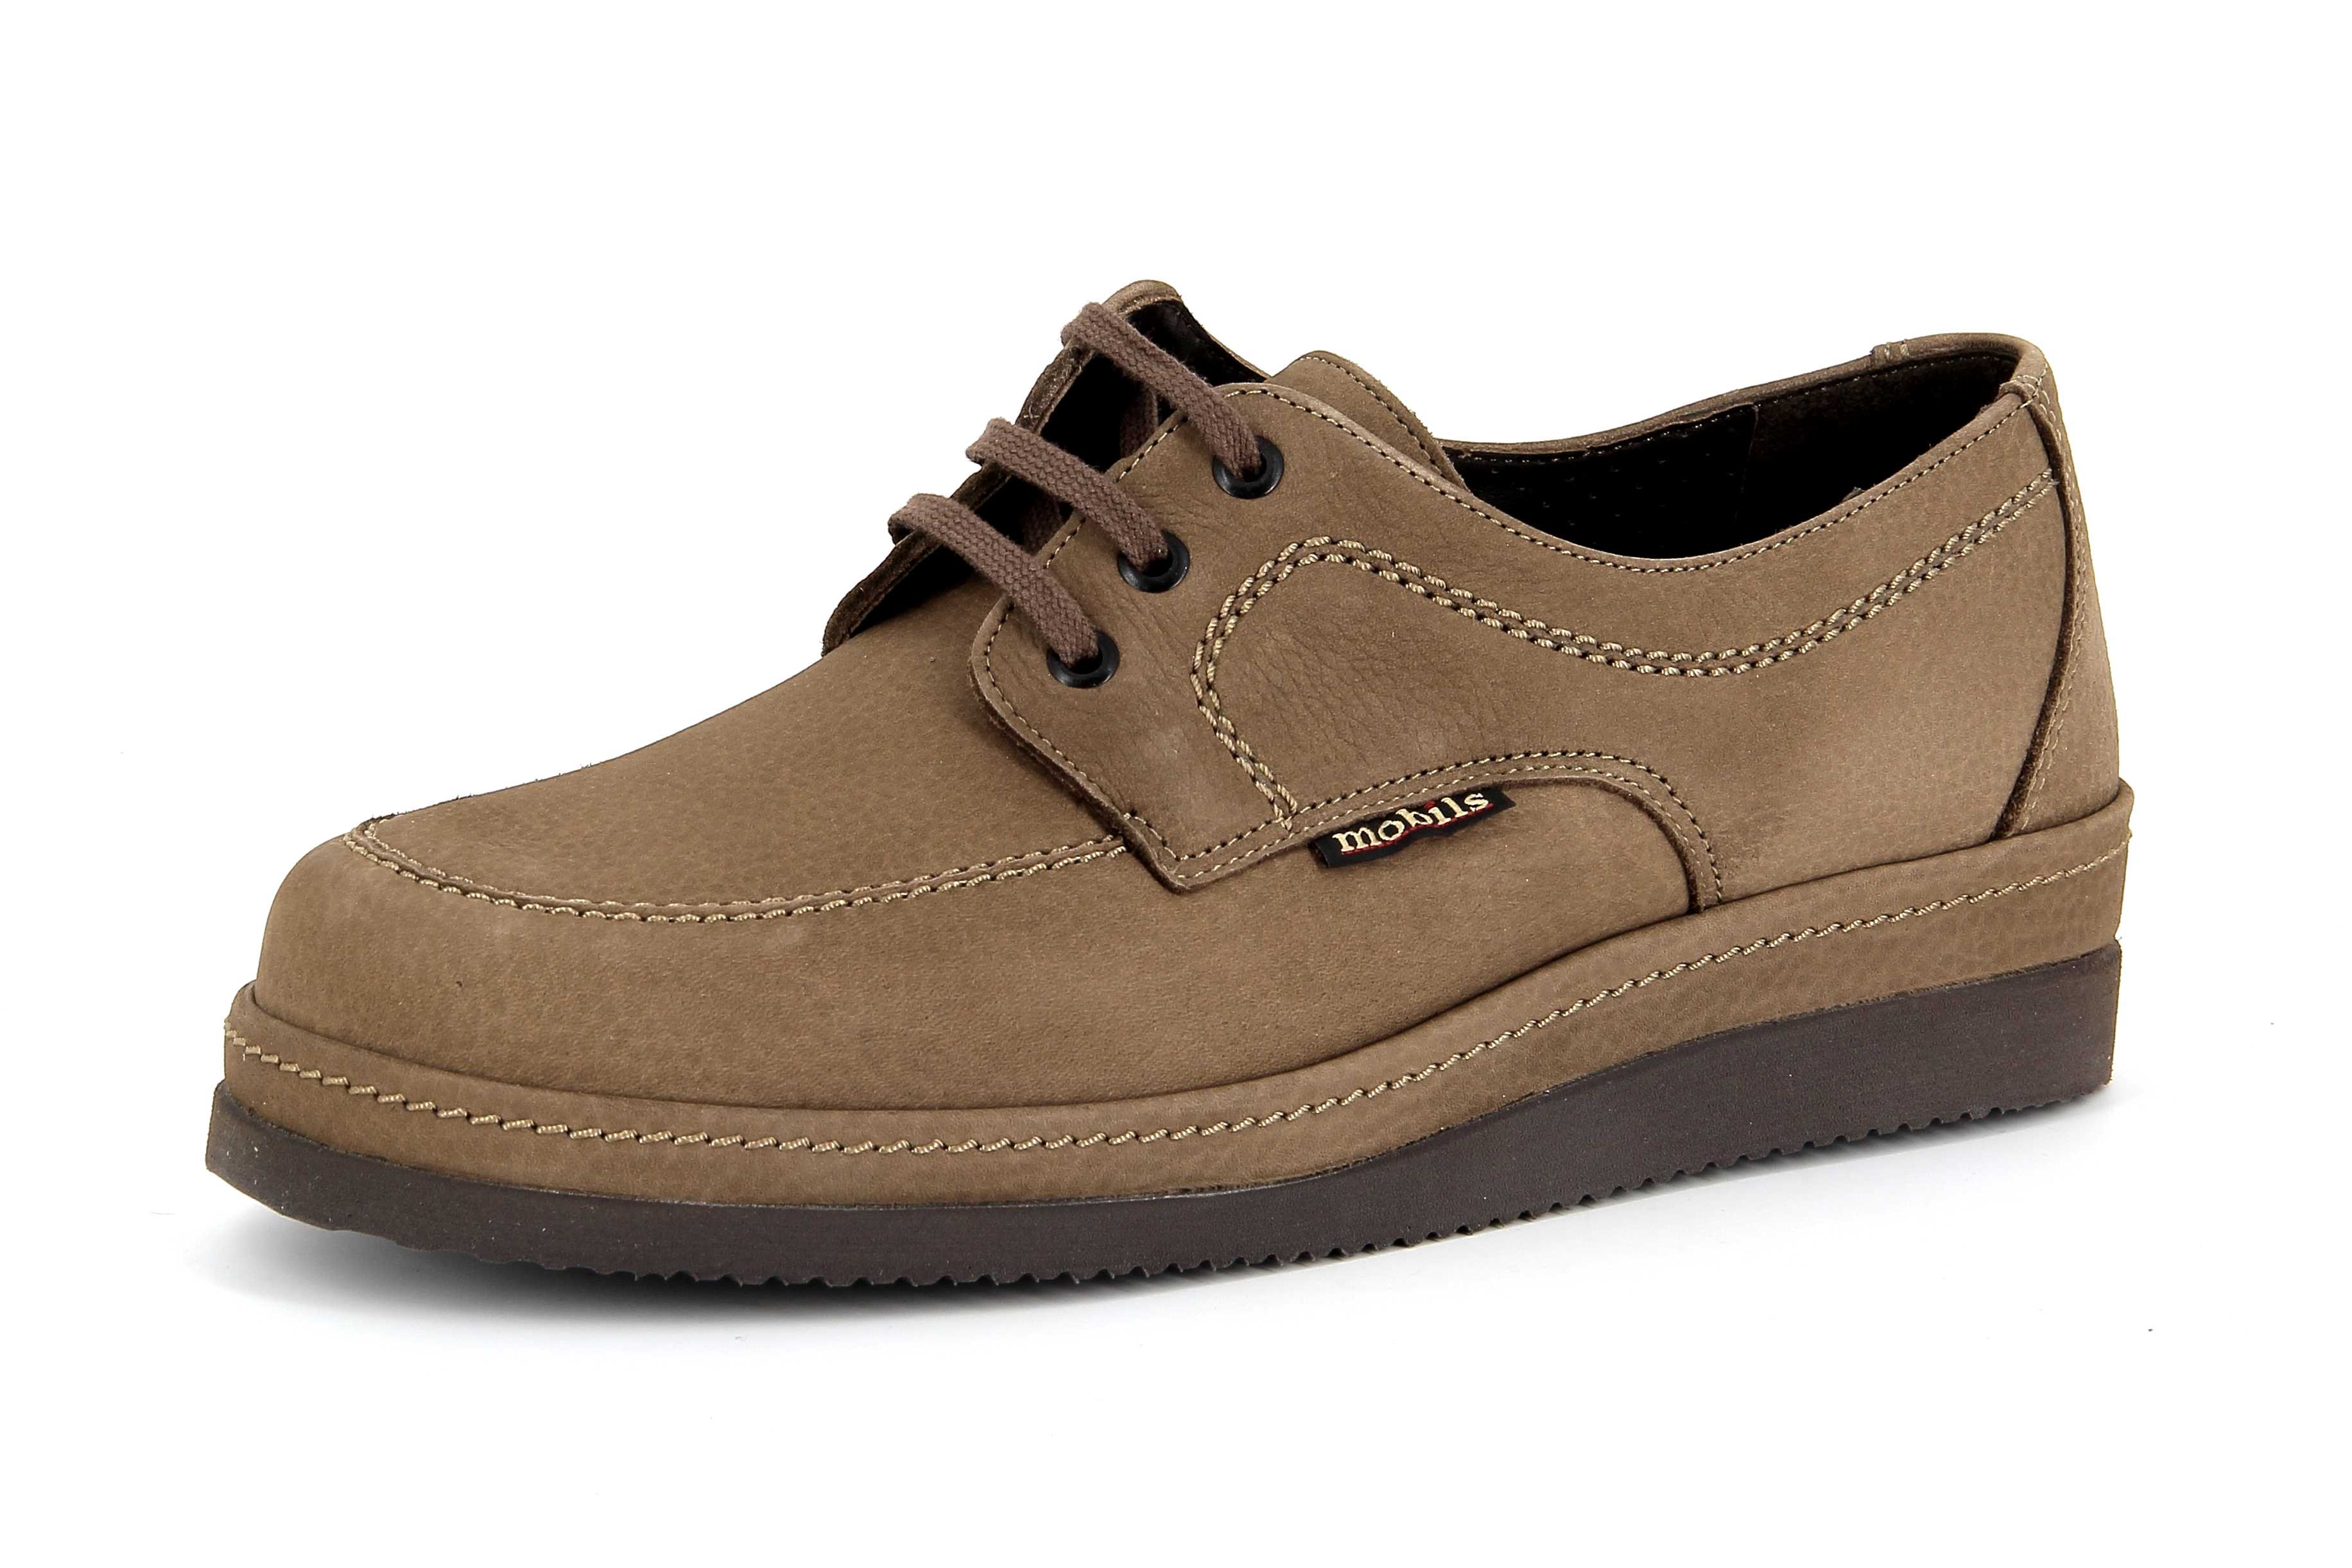 chaussures homme mephisto pas cher - Soldes magasin online > OFF-69%